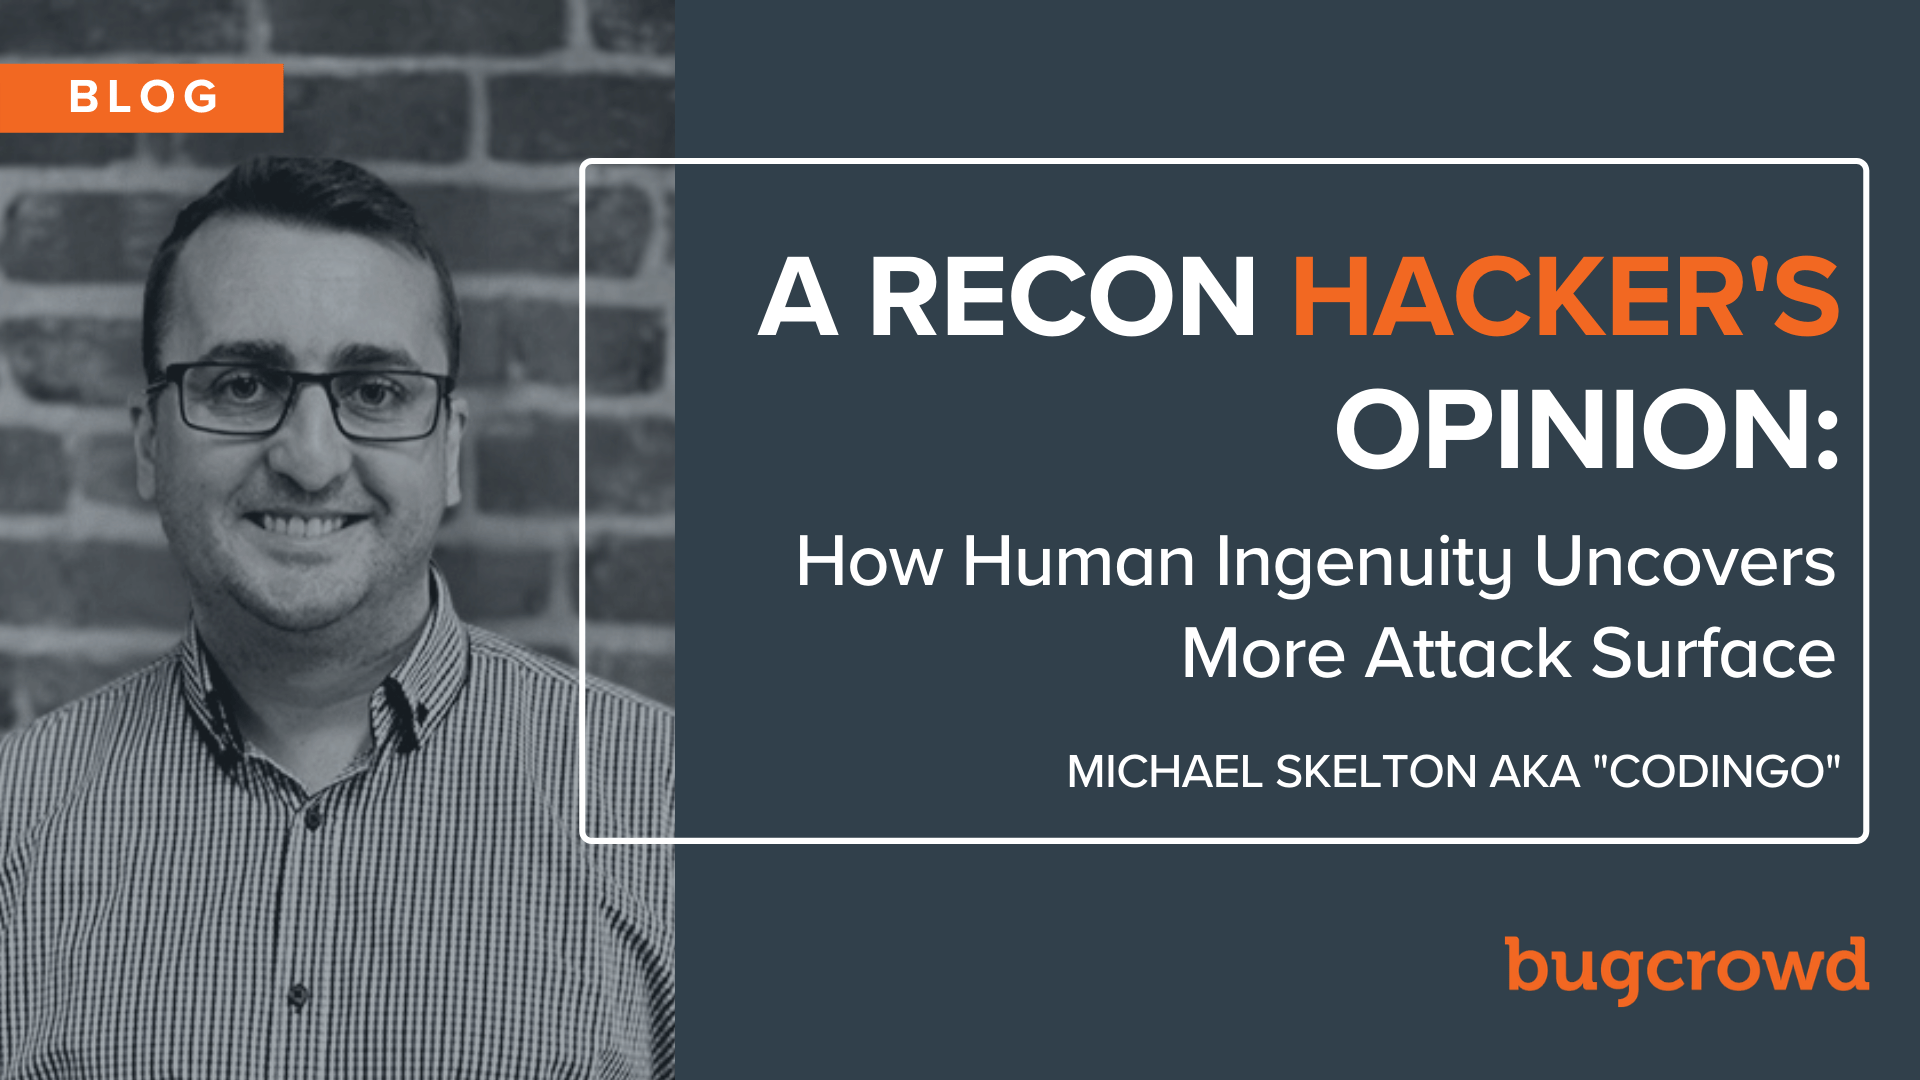 A Recon Hacker’s Opinion: How Human Ingenuity Uncovers More Attack Surface